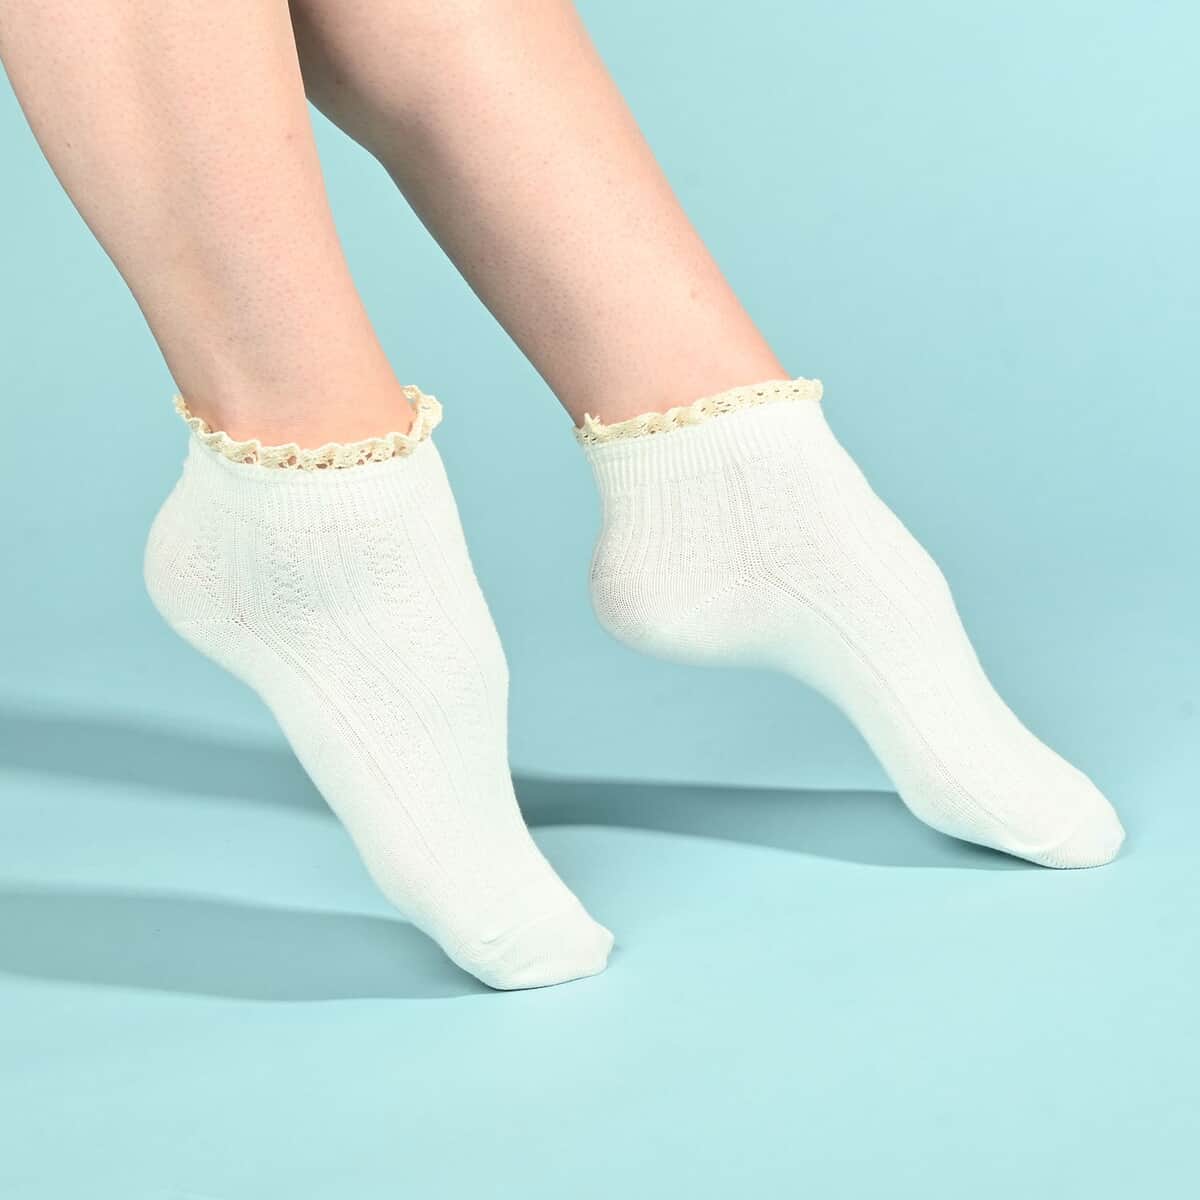 Ankle Sock Set of 4- Classic - White, Black, Heather Gray and Chic Blush image number 4